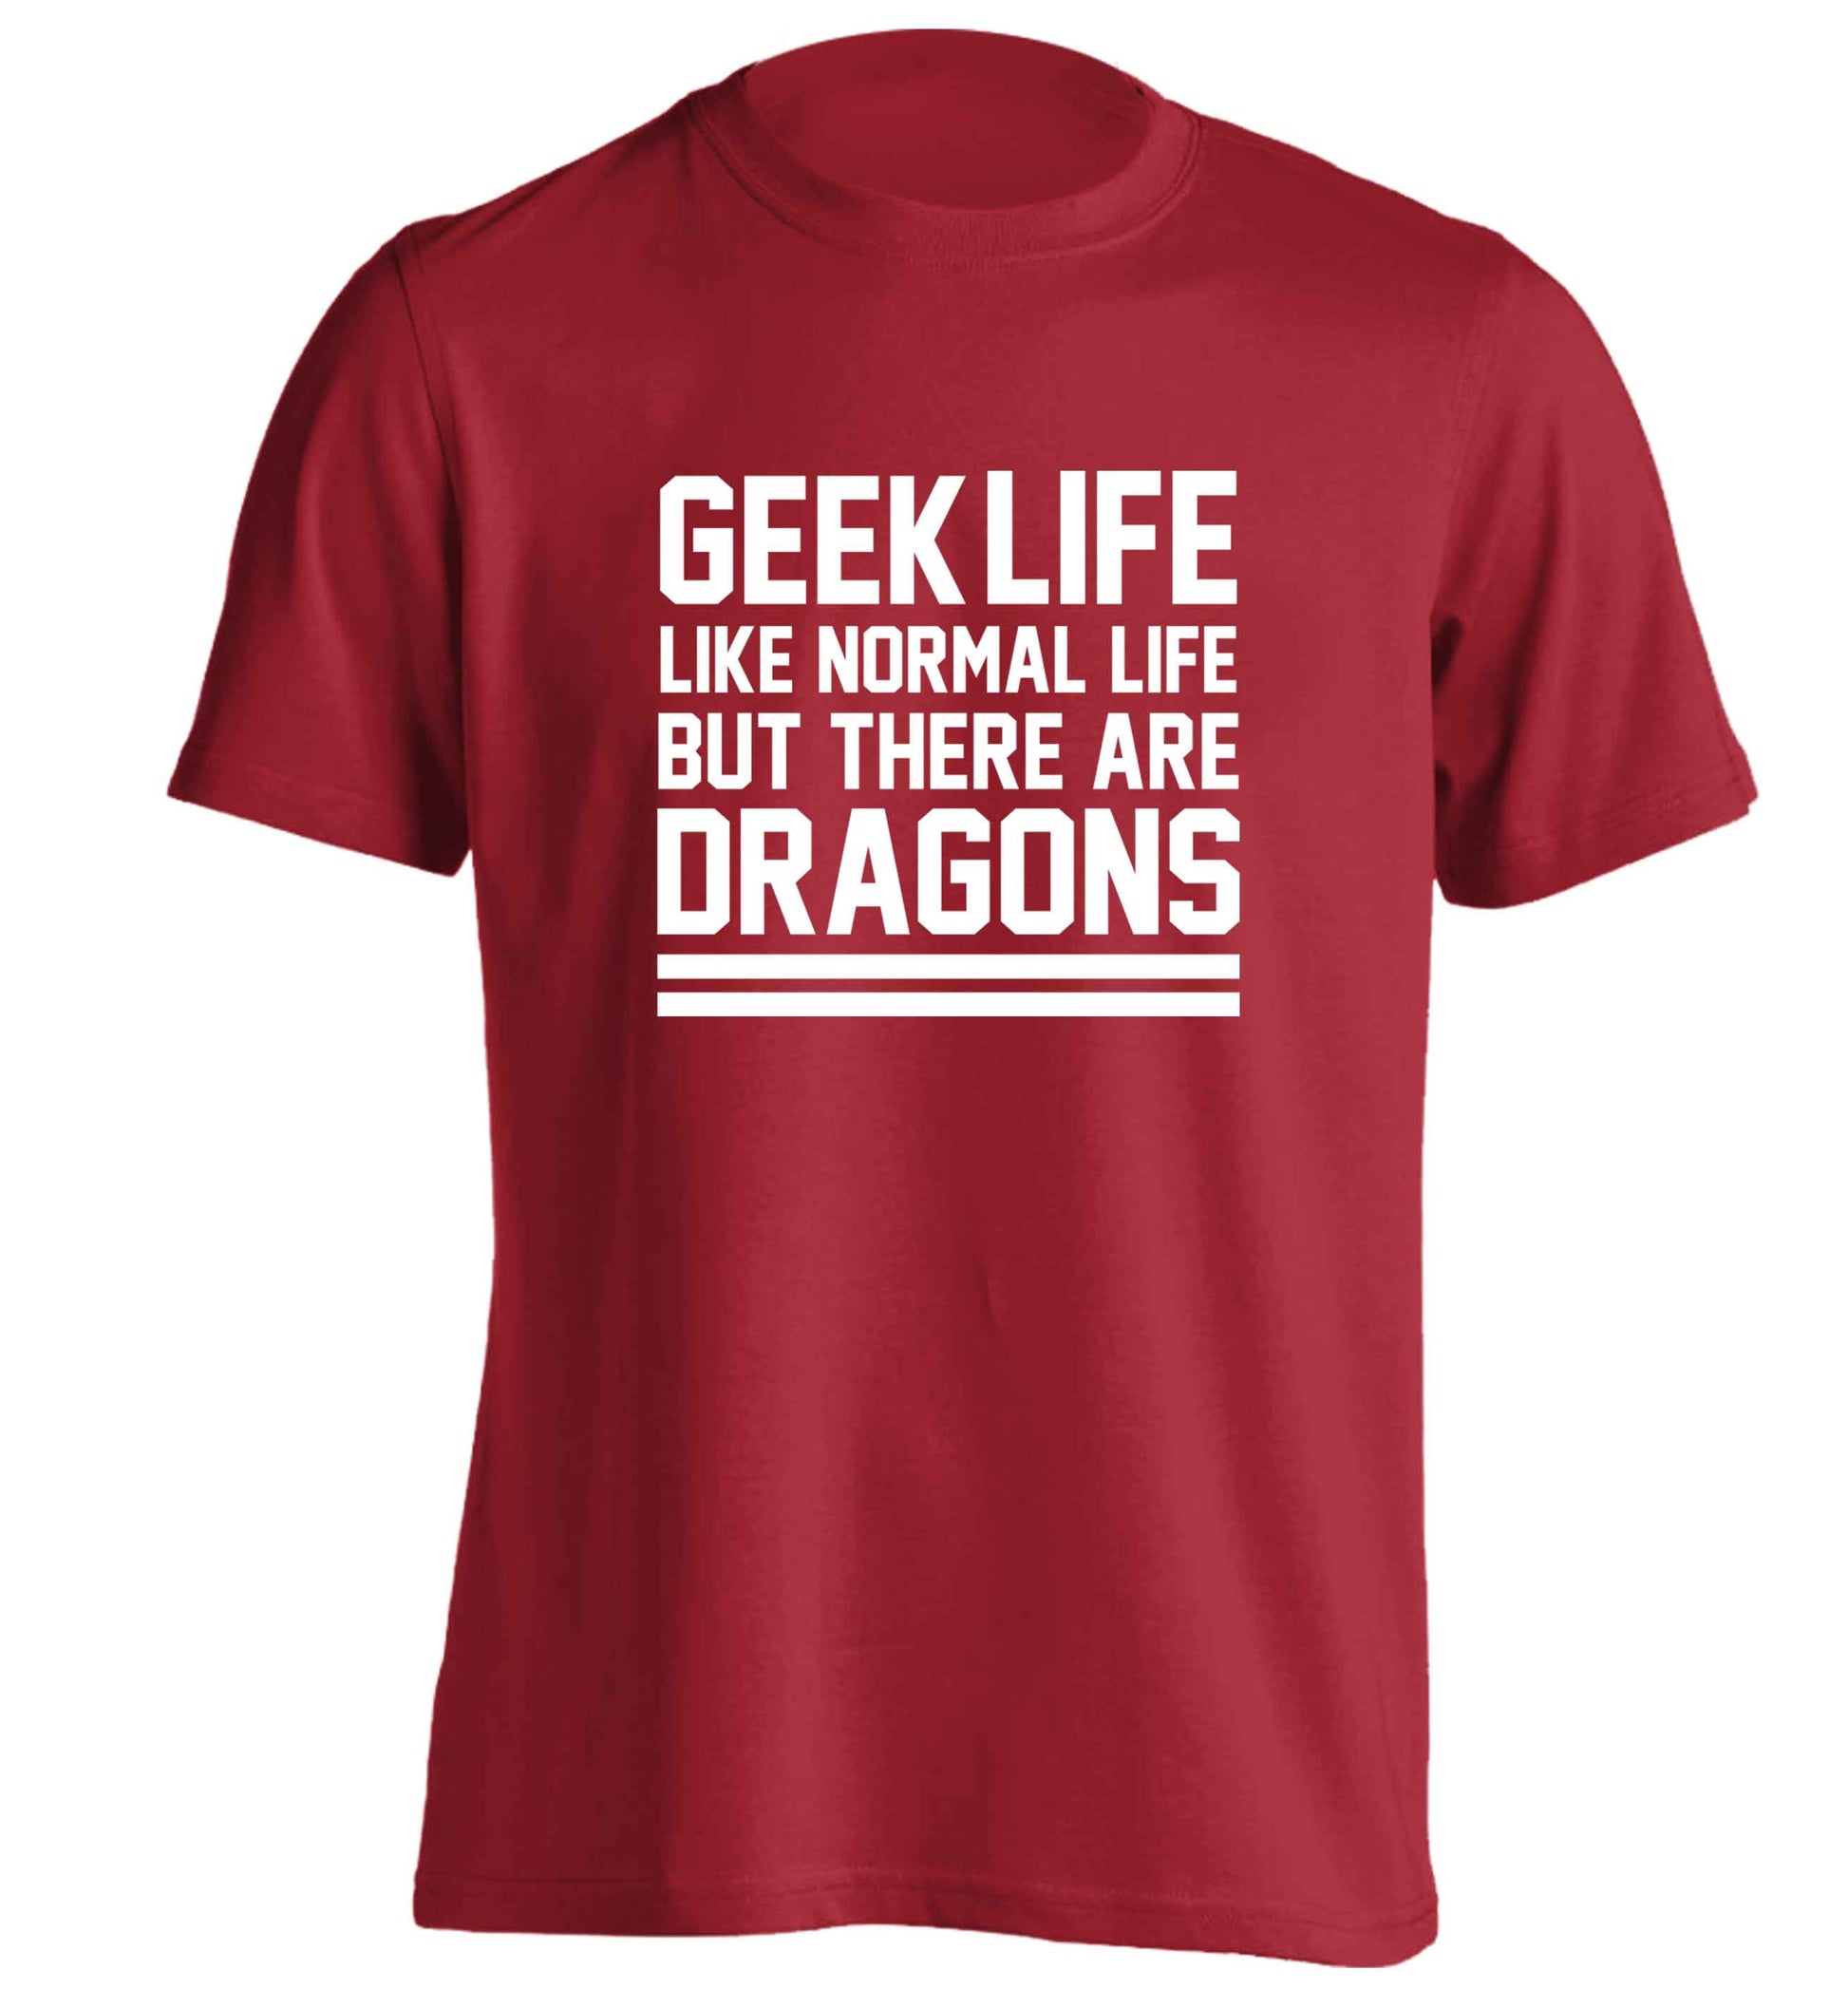 Geek life like normal life but there are dragons adults unisex red Tshirt 2XL